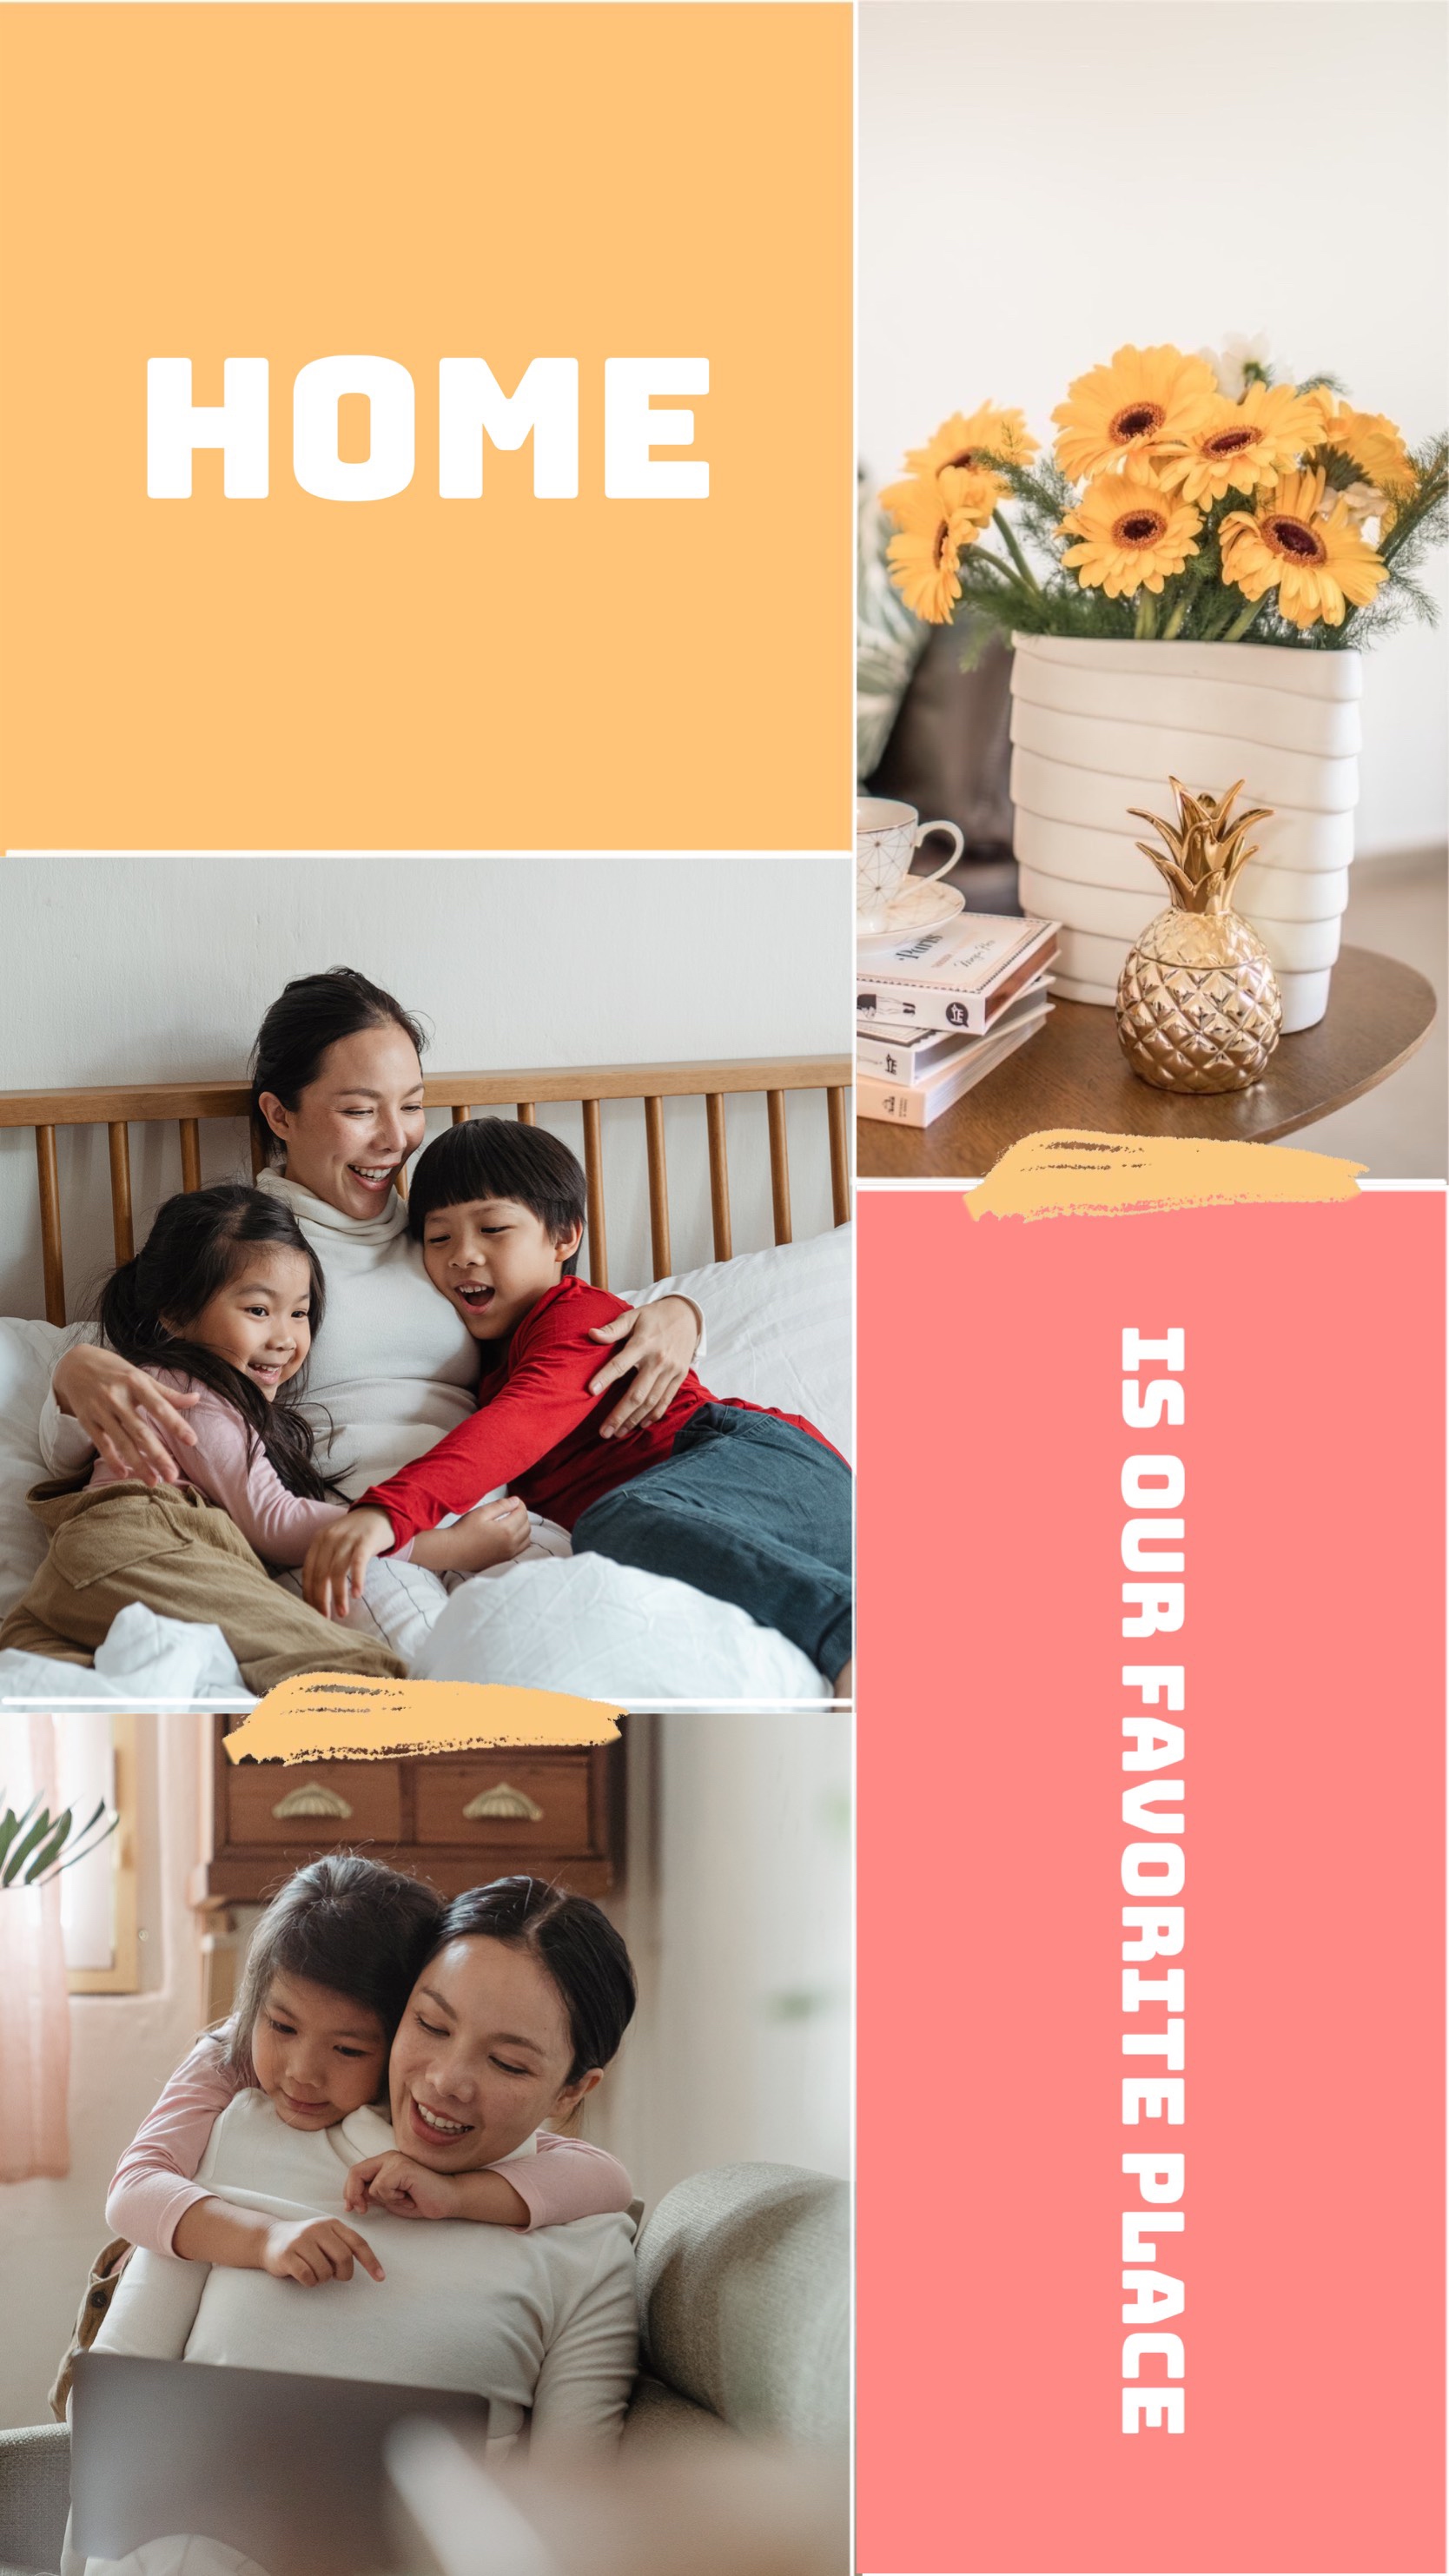 Asian family home indoor Instagram story template